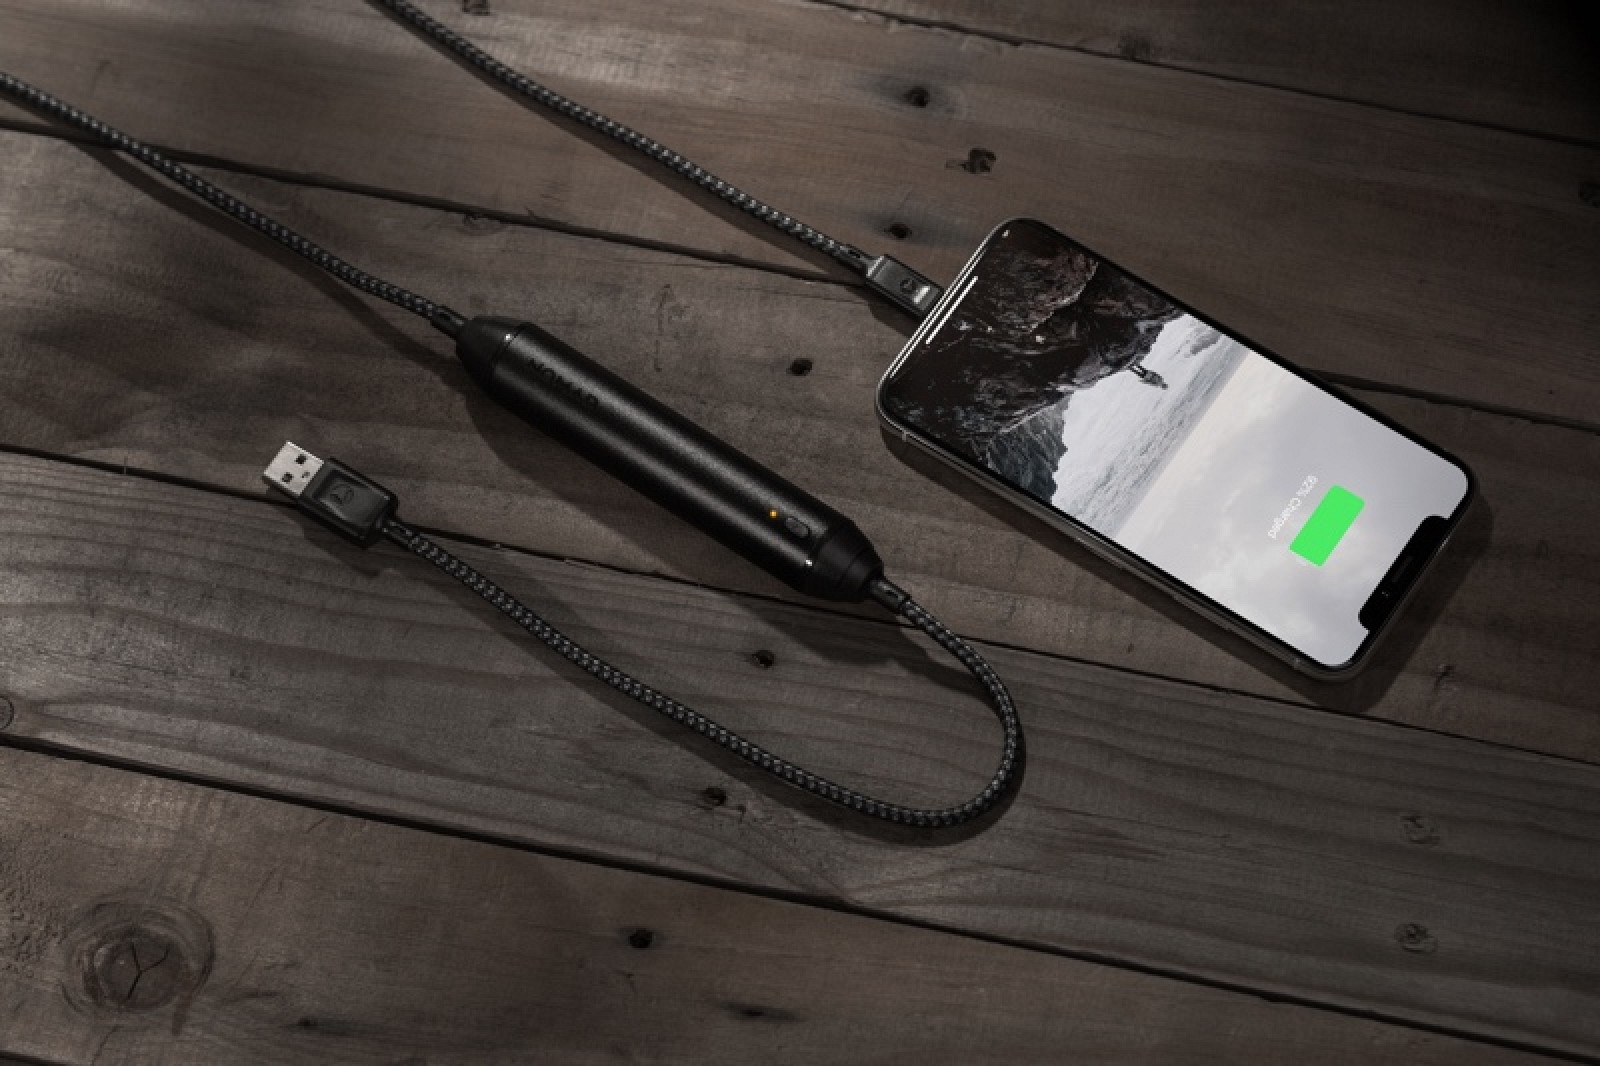 MacRumors Giveaway: Win a Battery Cable for Charging Your iPhone From Nomad